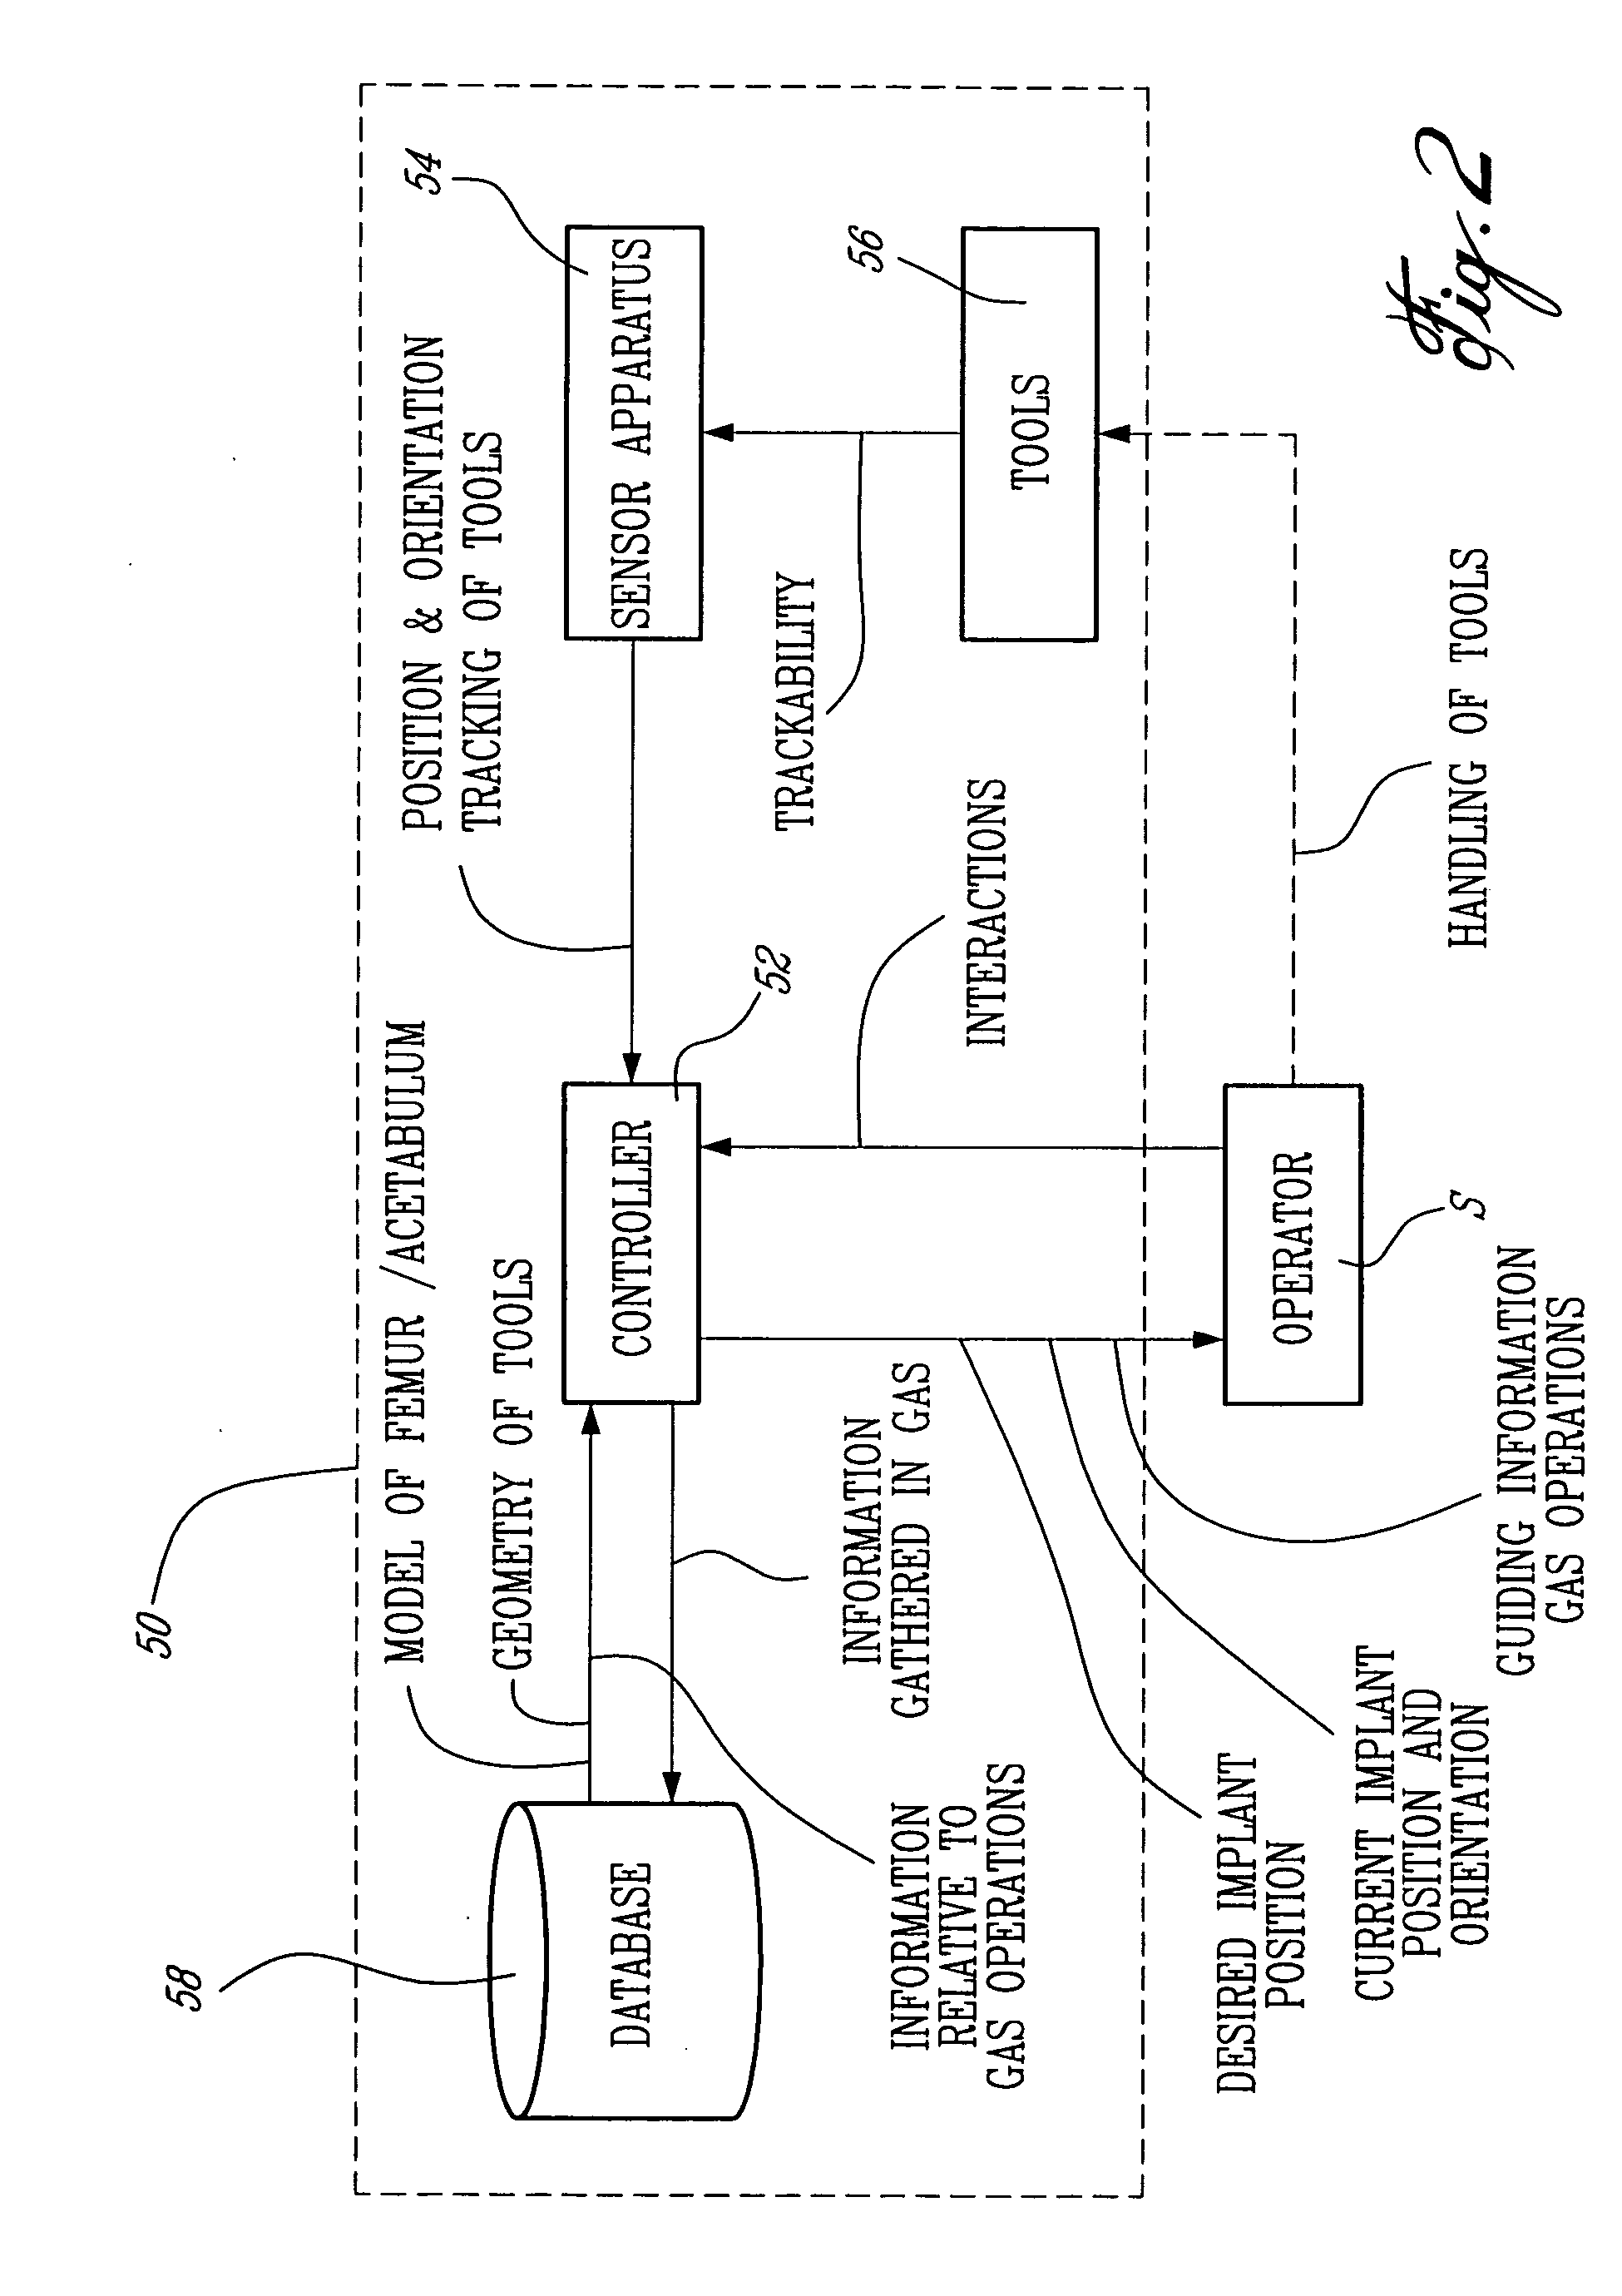 Apparatus for digitizing intramedullary canal and method